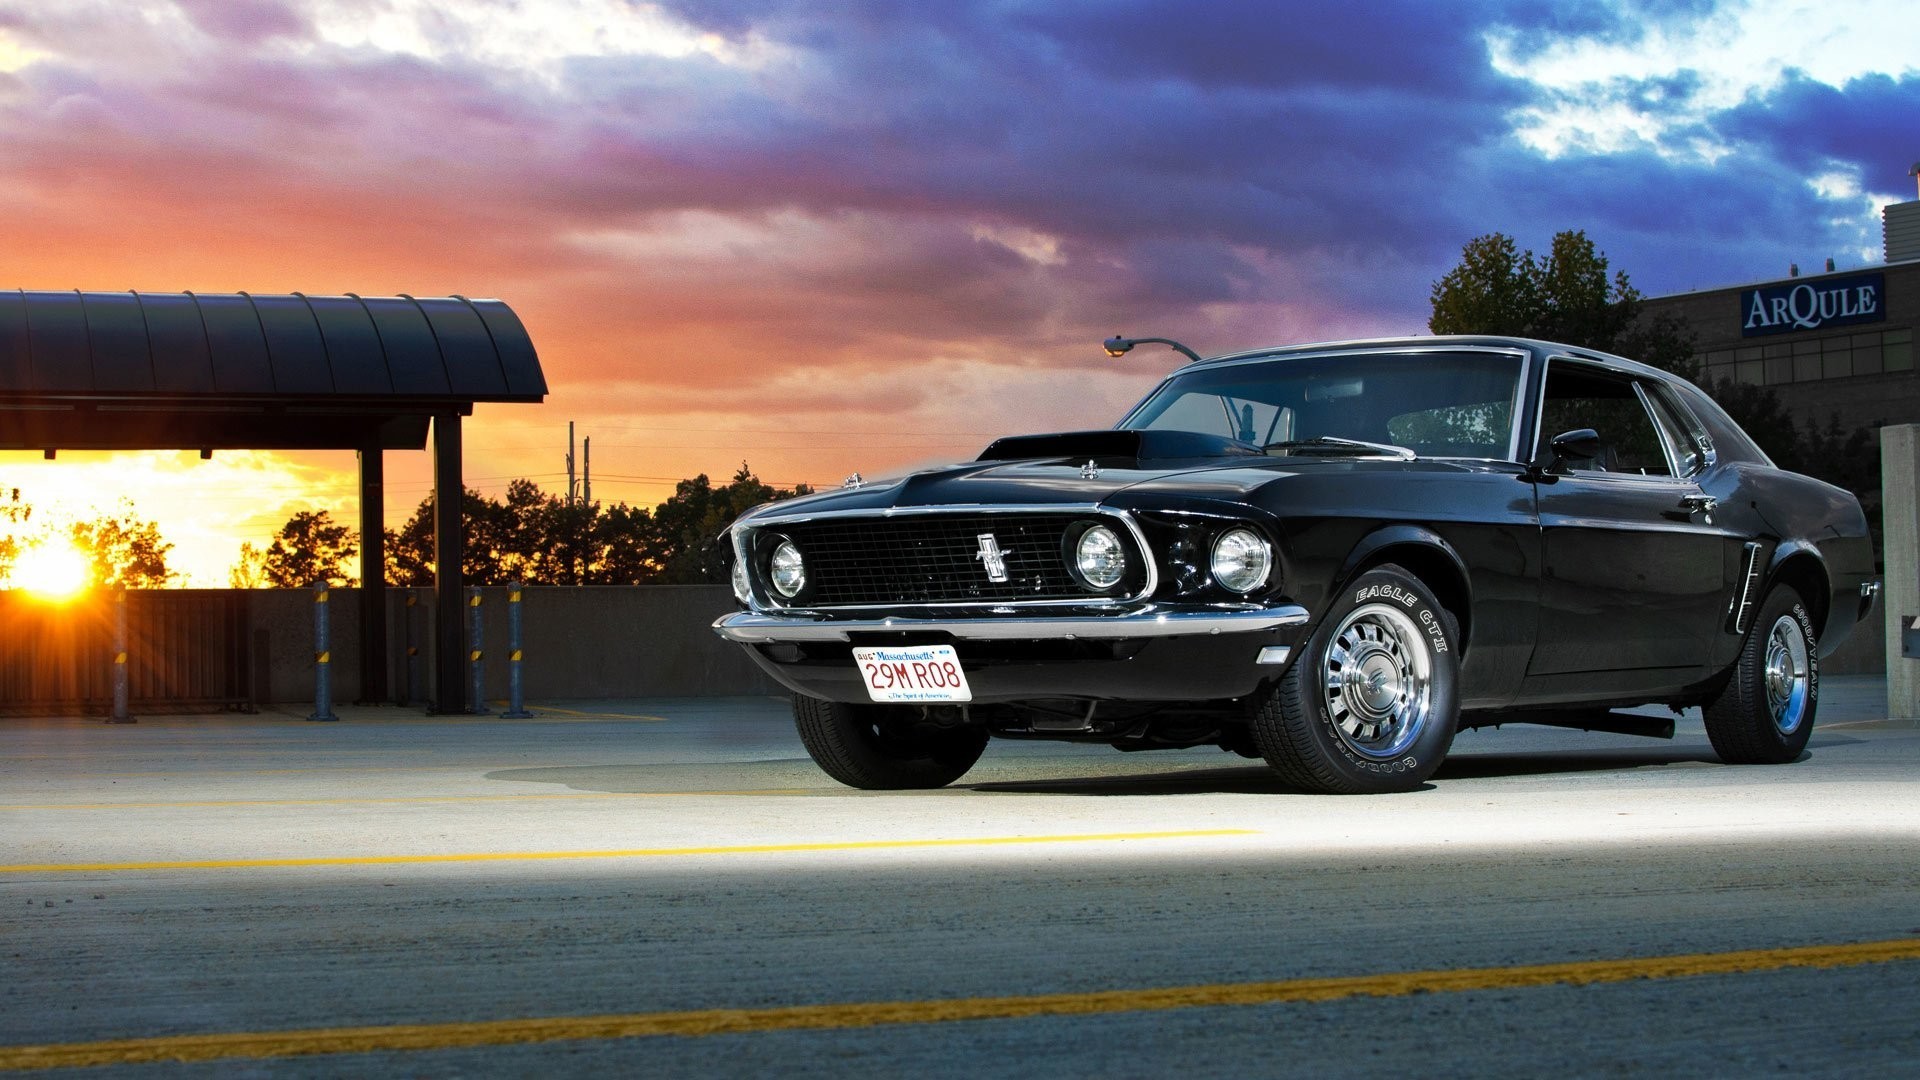 1920x1080 1280x2120 Ford Mustang Gt Red Front Screen Desktop Muscle Car Wallpaper  Iphone 6